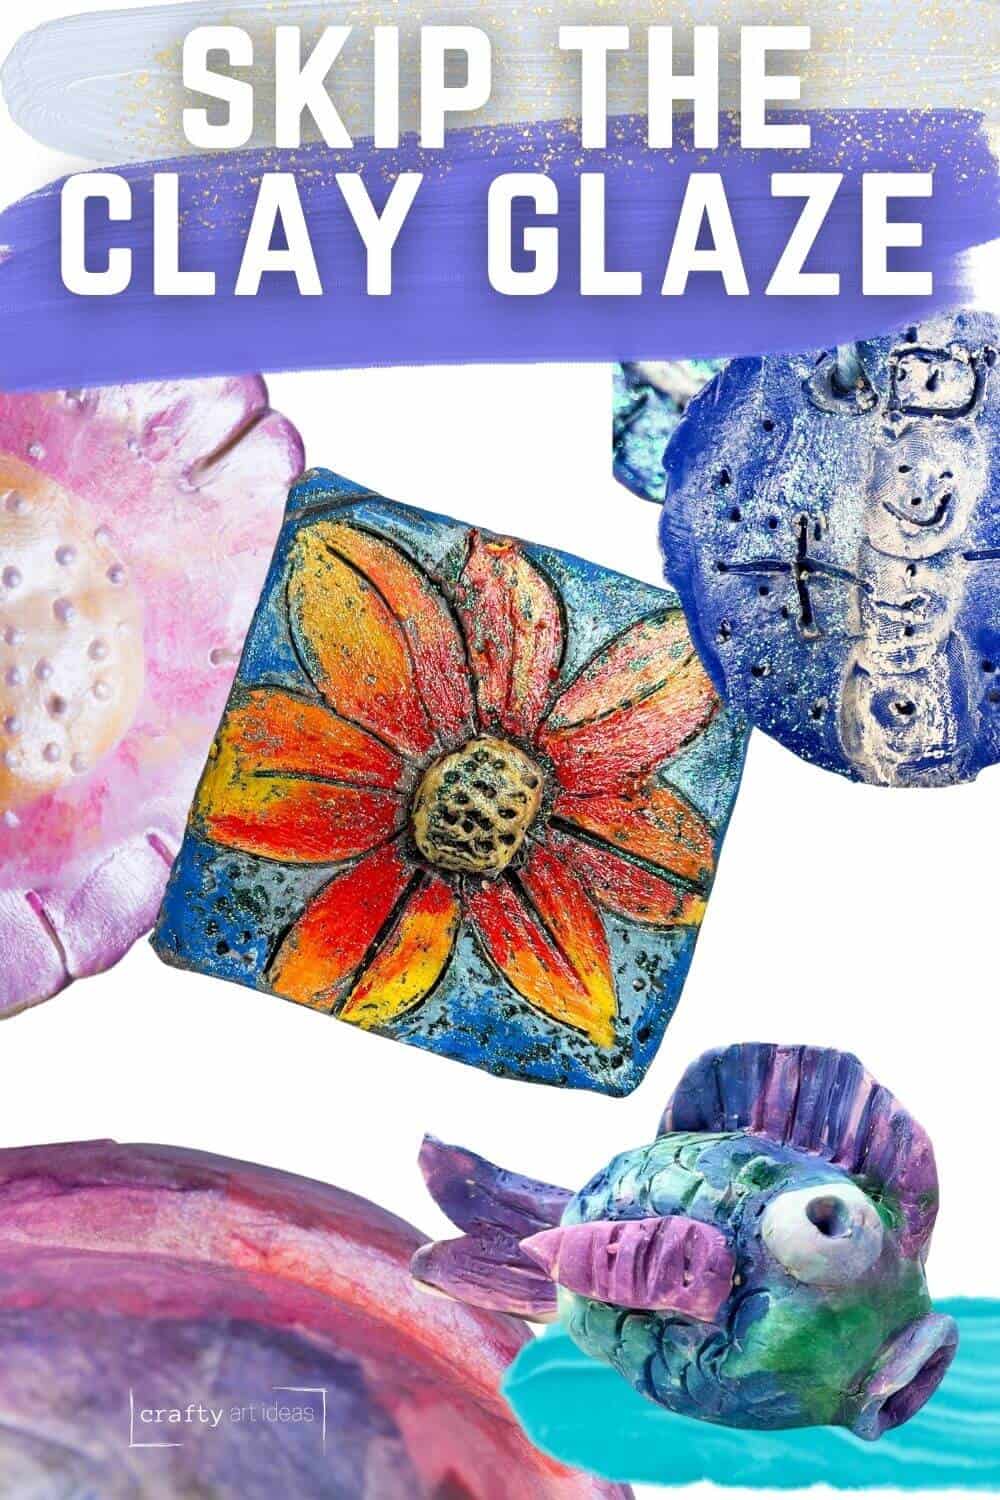 skip the glaze with different ways to add color to clay projects for kids.